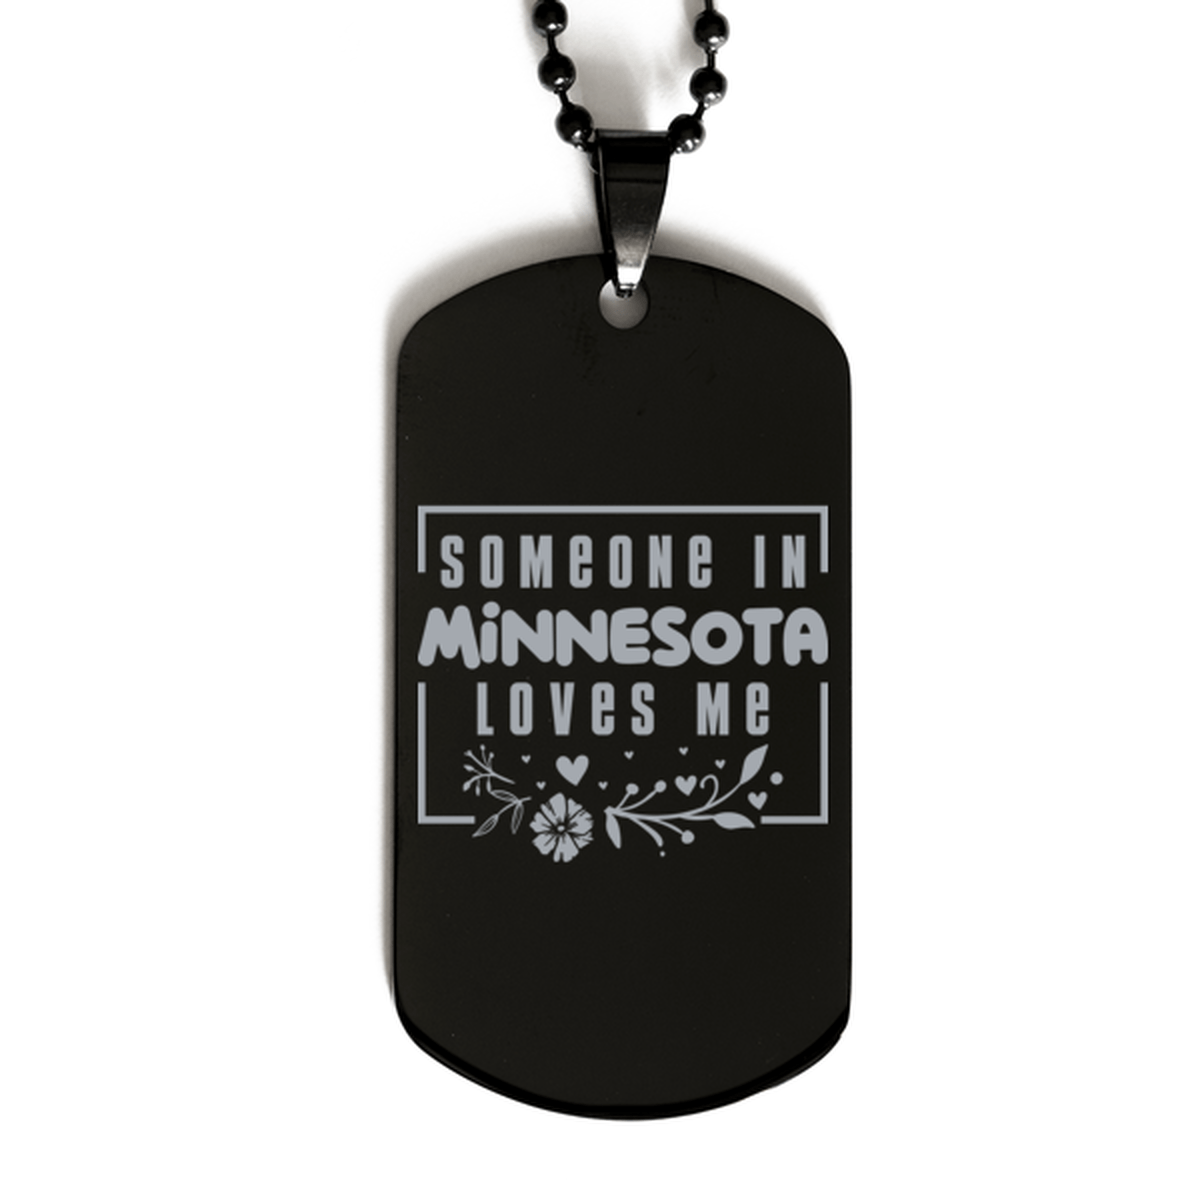 Cute Minnesota Black Dog Tag Necklace, Someone in Minnesota Loves Me, Best Birthday Gifts from Minnesota Friends & Family